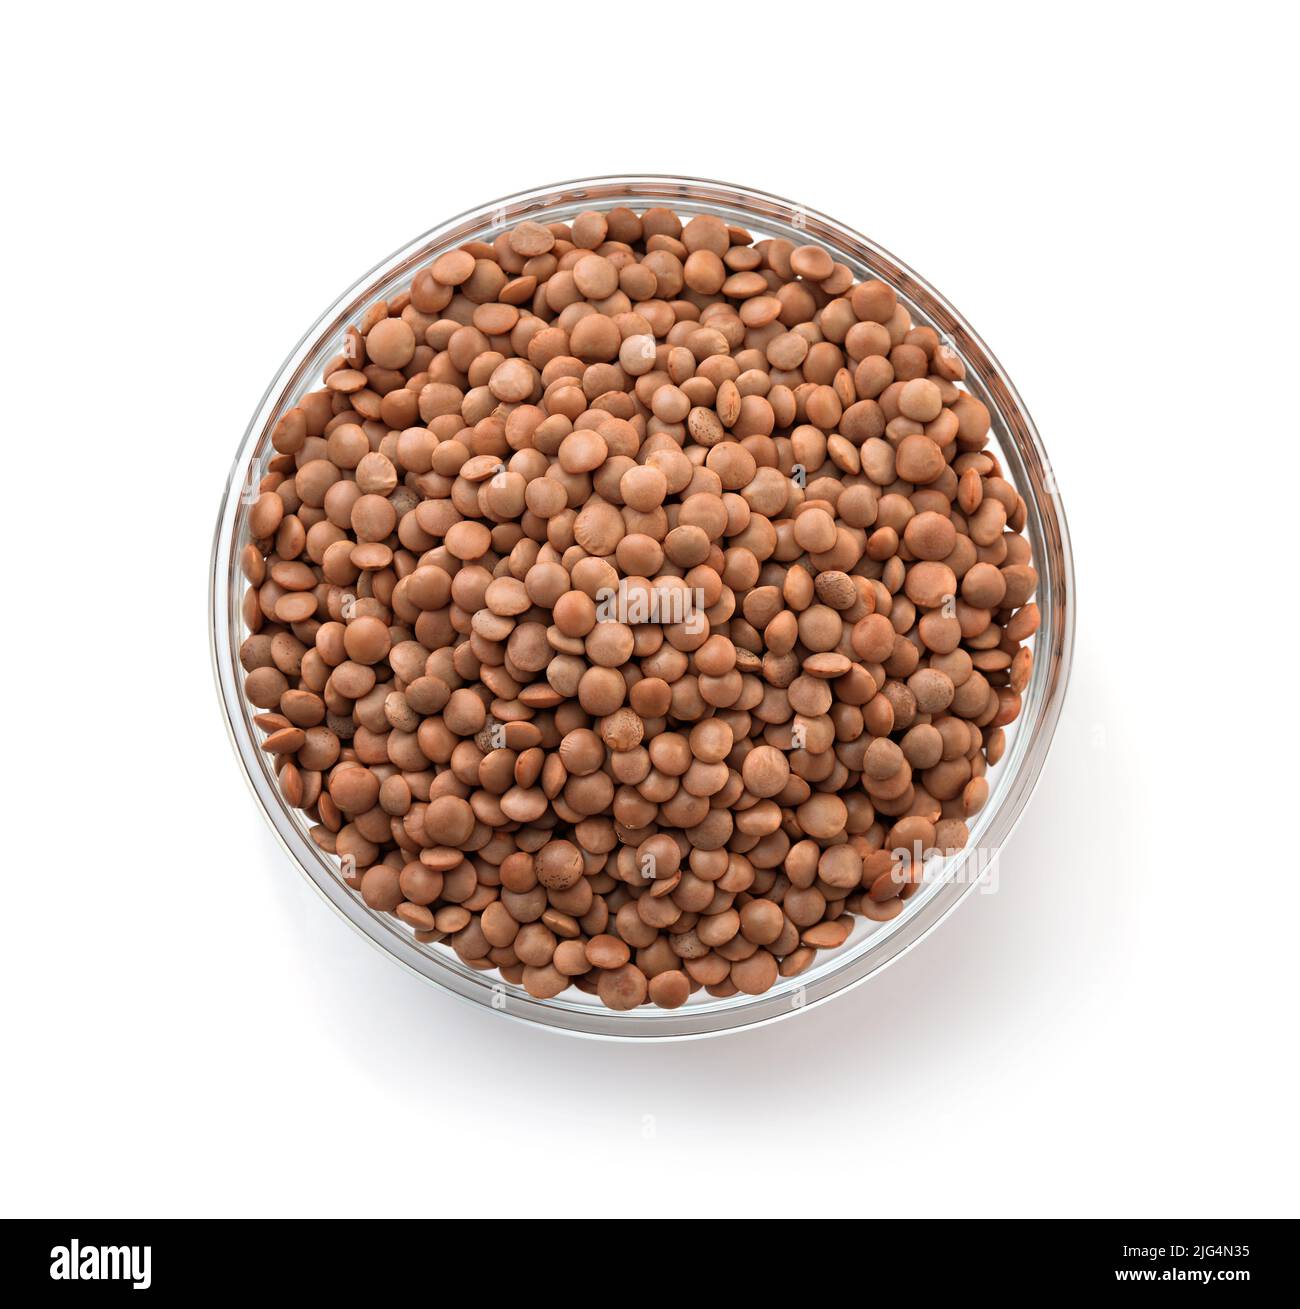 Top view of dry brown lentils in glass bowl isolated on white Stock Photo